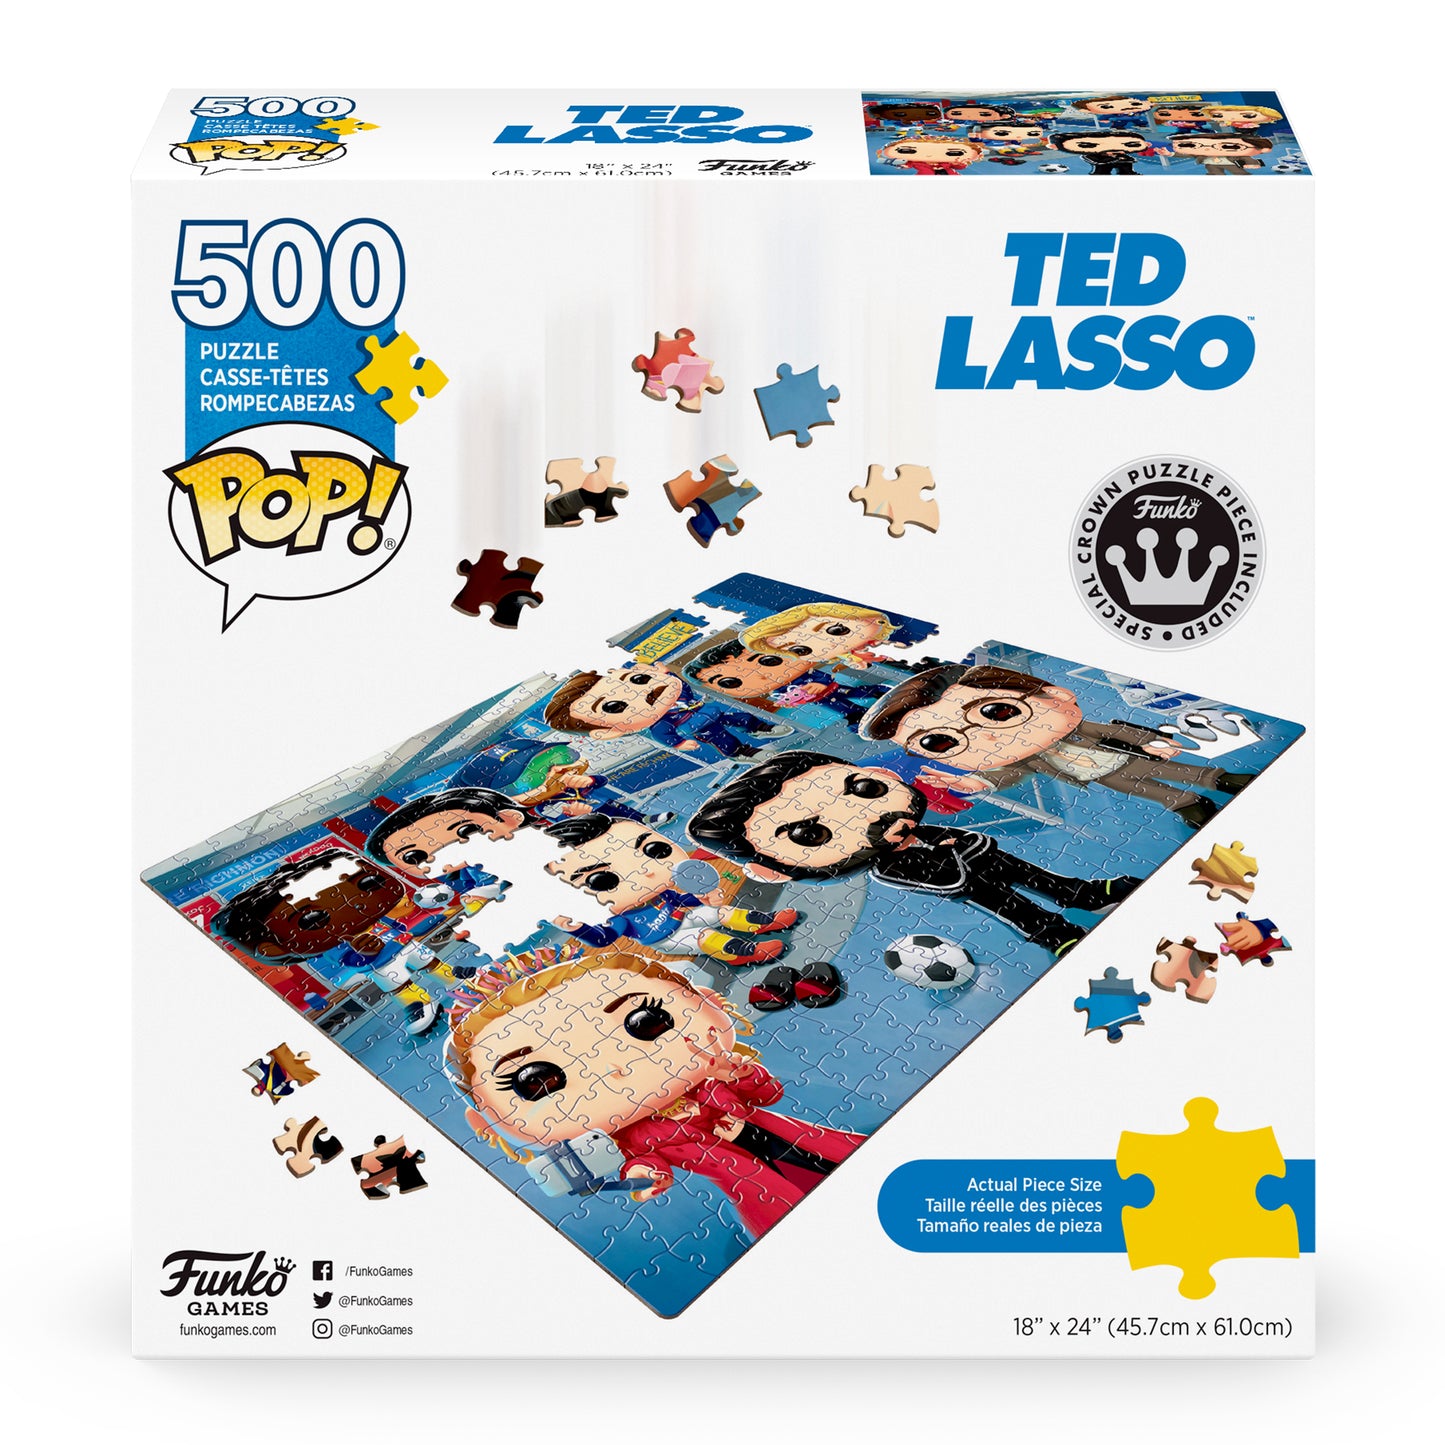 POP! Puzzle – Ted Lasso - 500 pieces - great gift, Jigsaw Puzzle, puzzel, puzzle, puzzles, Ted Lasso, tv series - Gadgetz Home